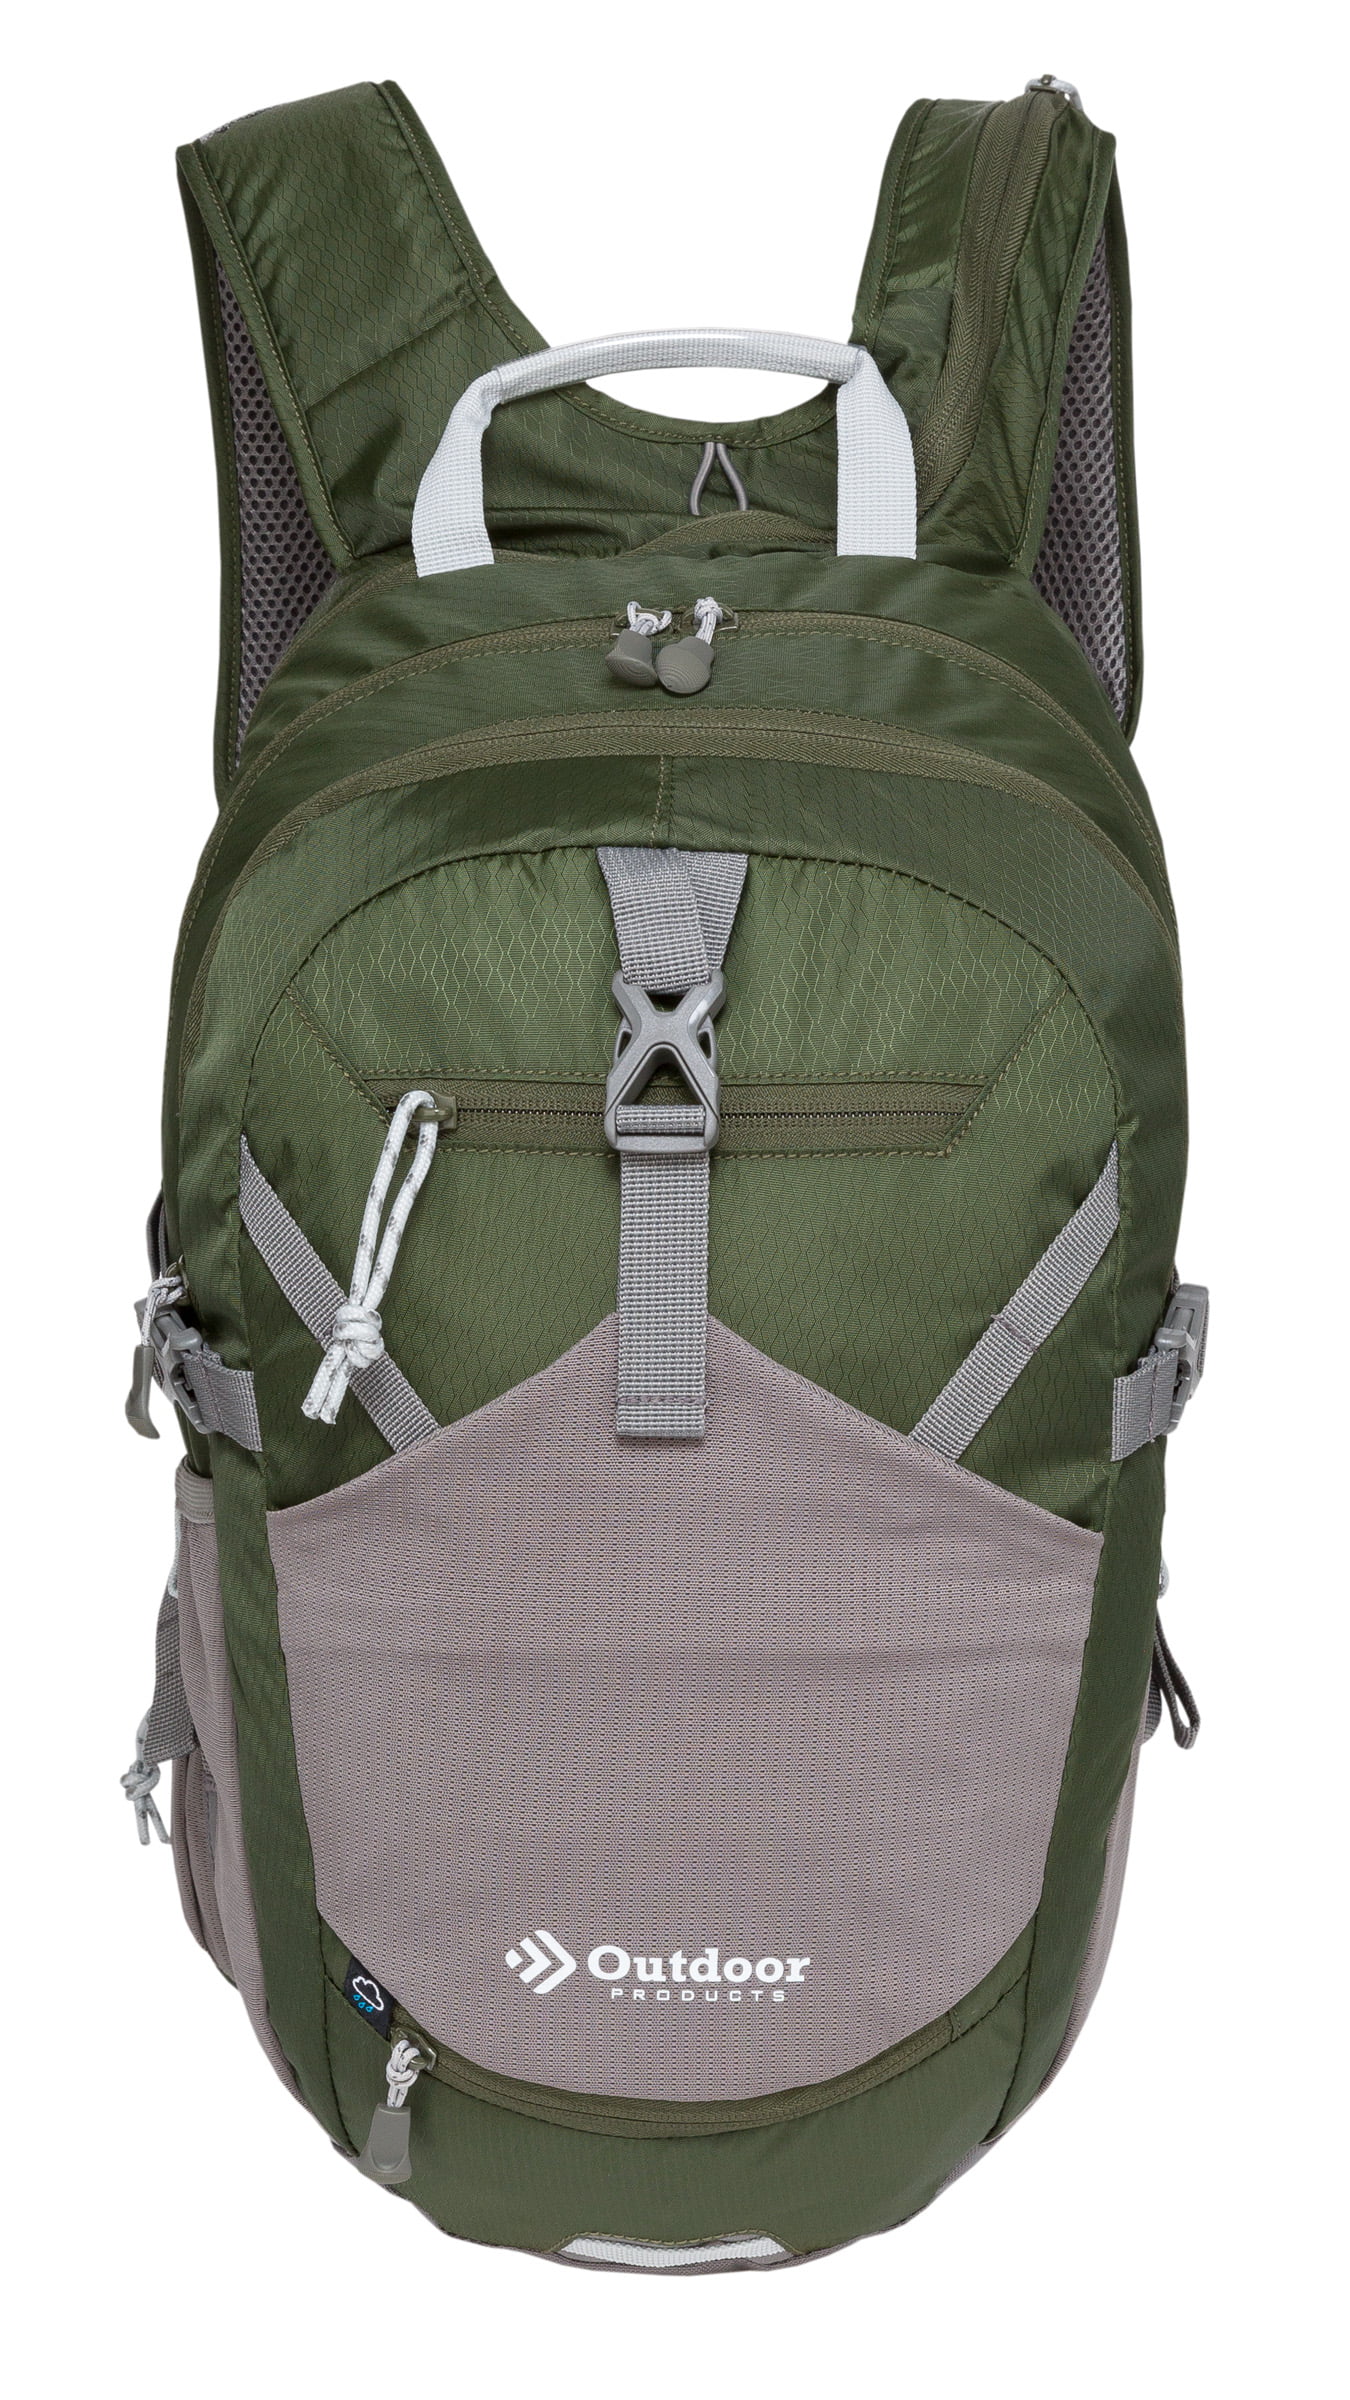 18L Hydration Pack with 3L Reservoir, Green